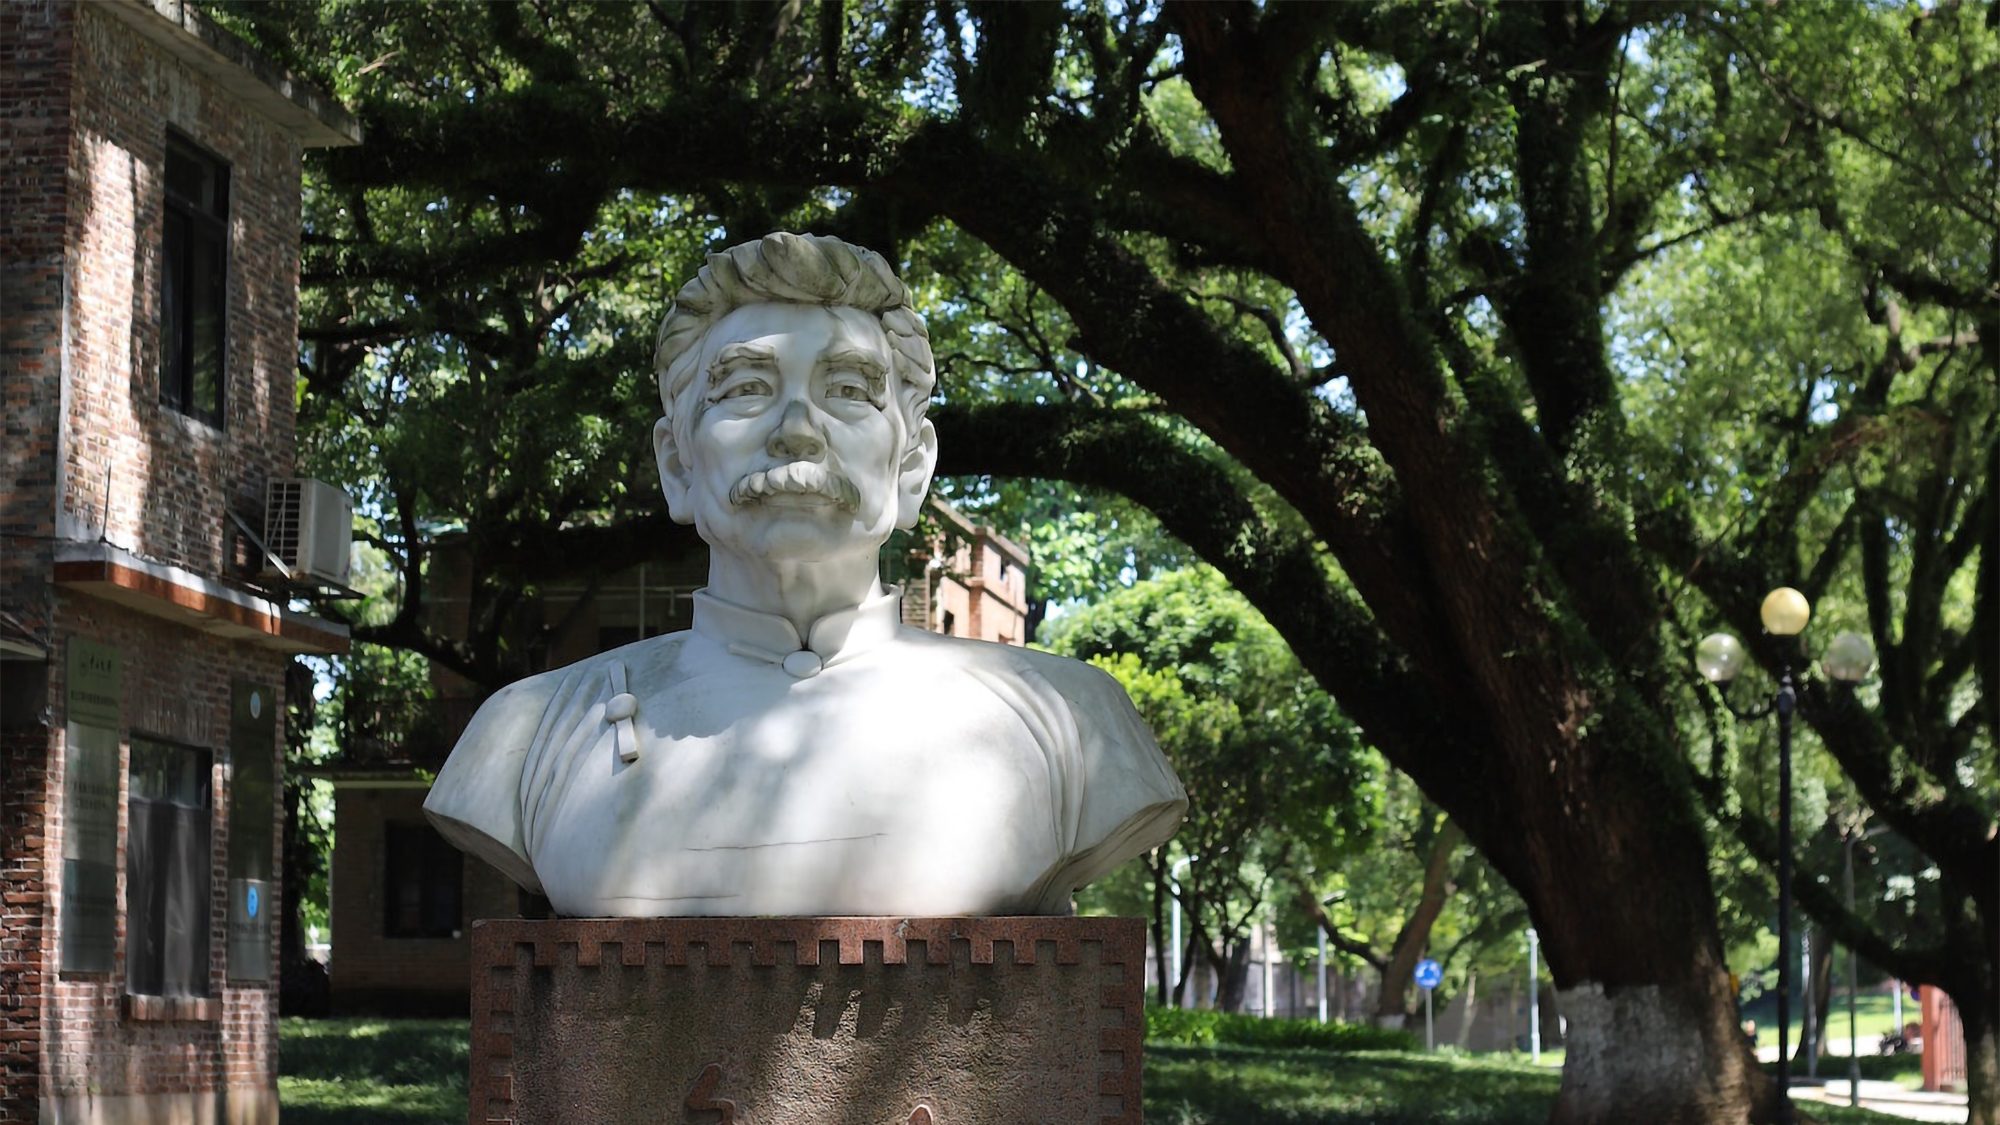 Statue bust of Lu Xun with leafy trees in background